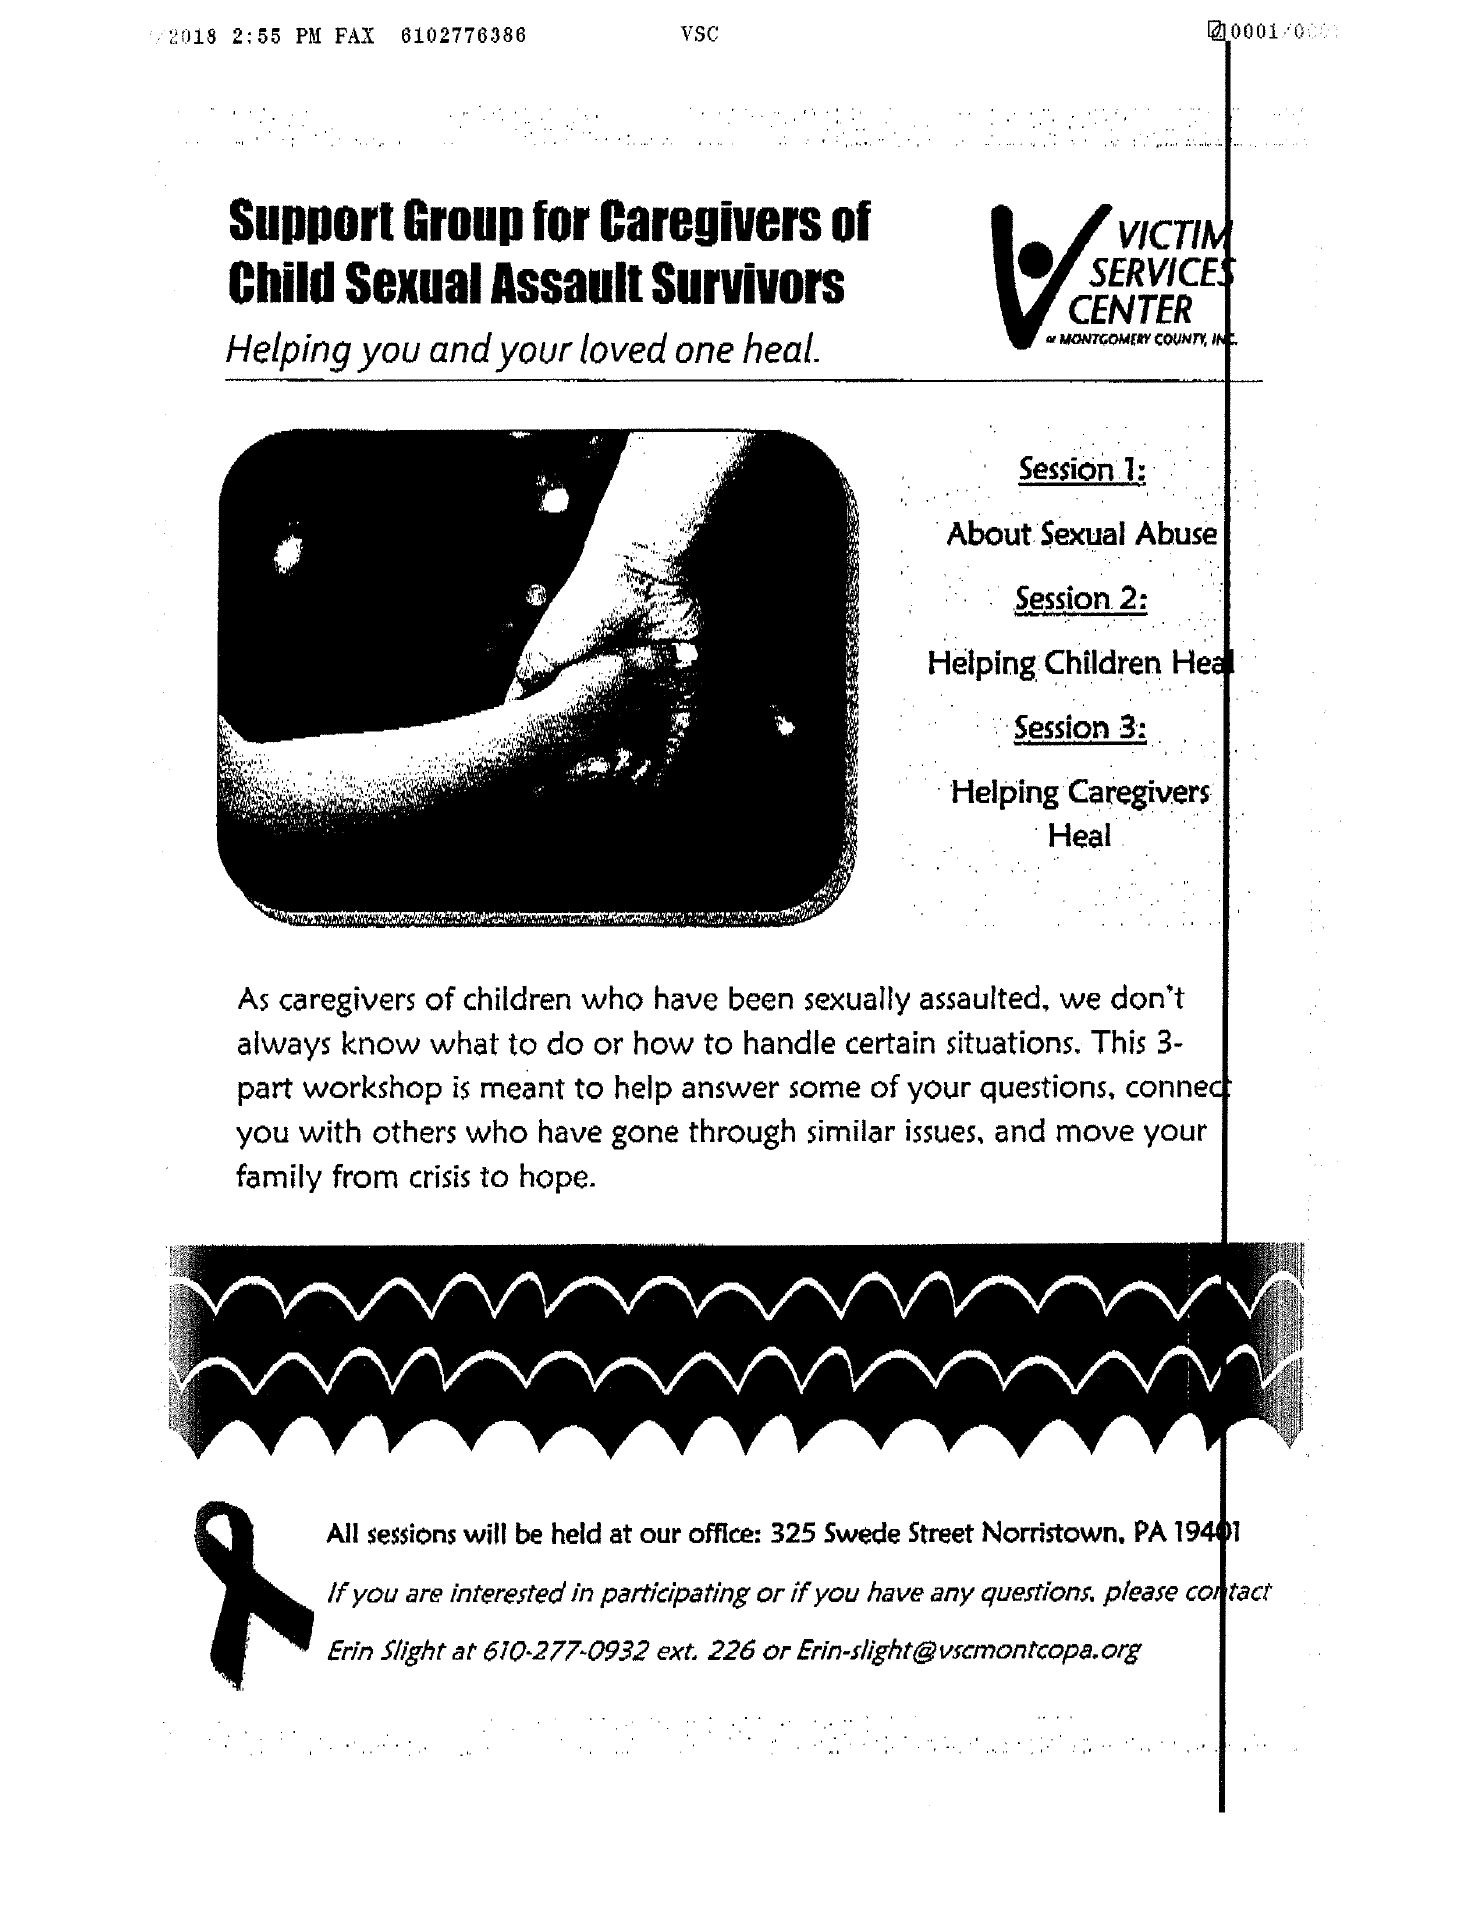 CAREGIVERS OF CHILD SEXUAL ASSAULT SURVIVORS SUPPORT GROUP